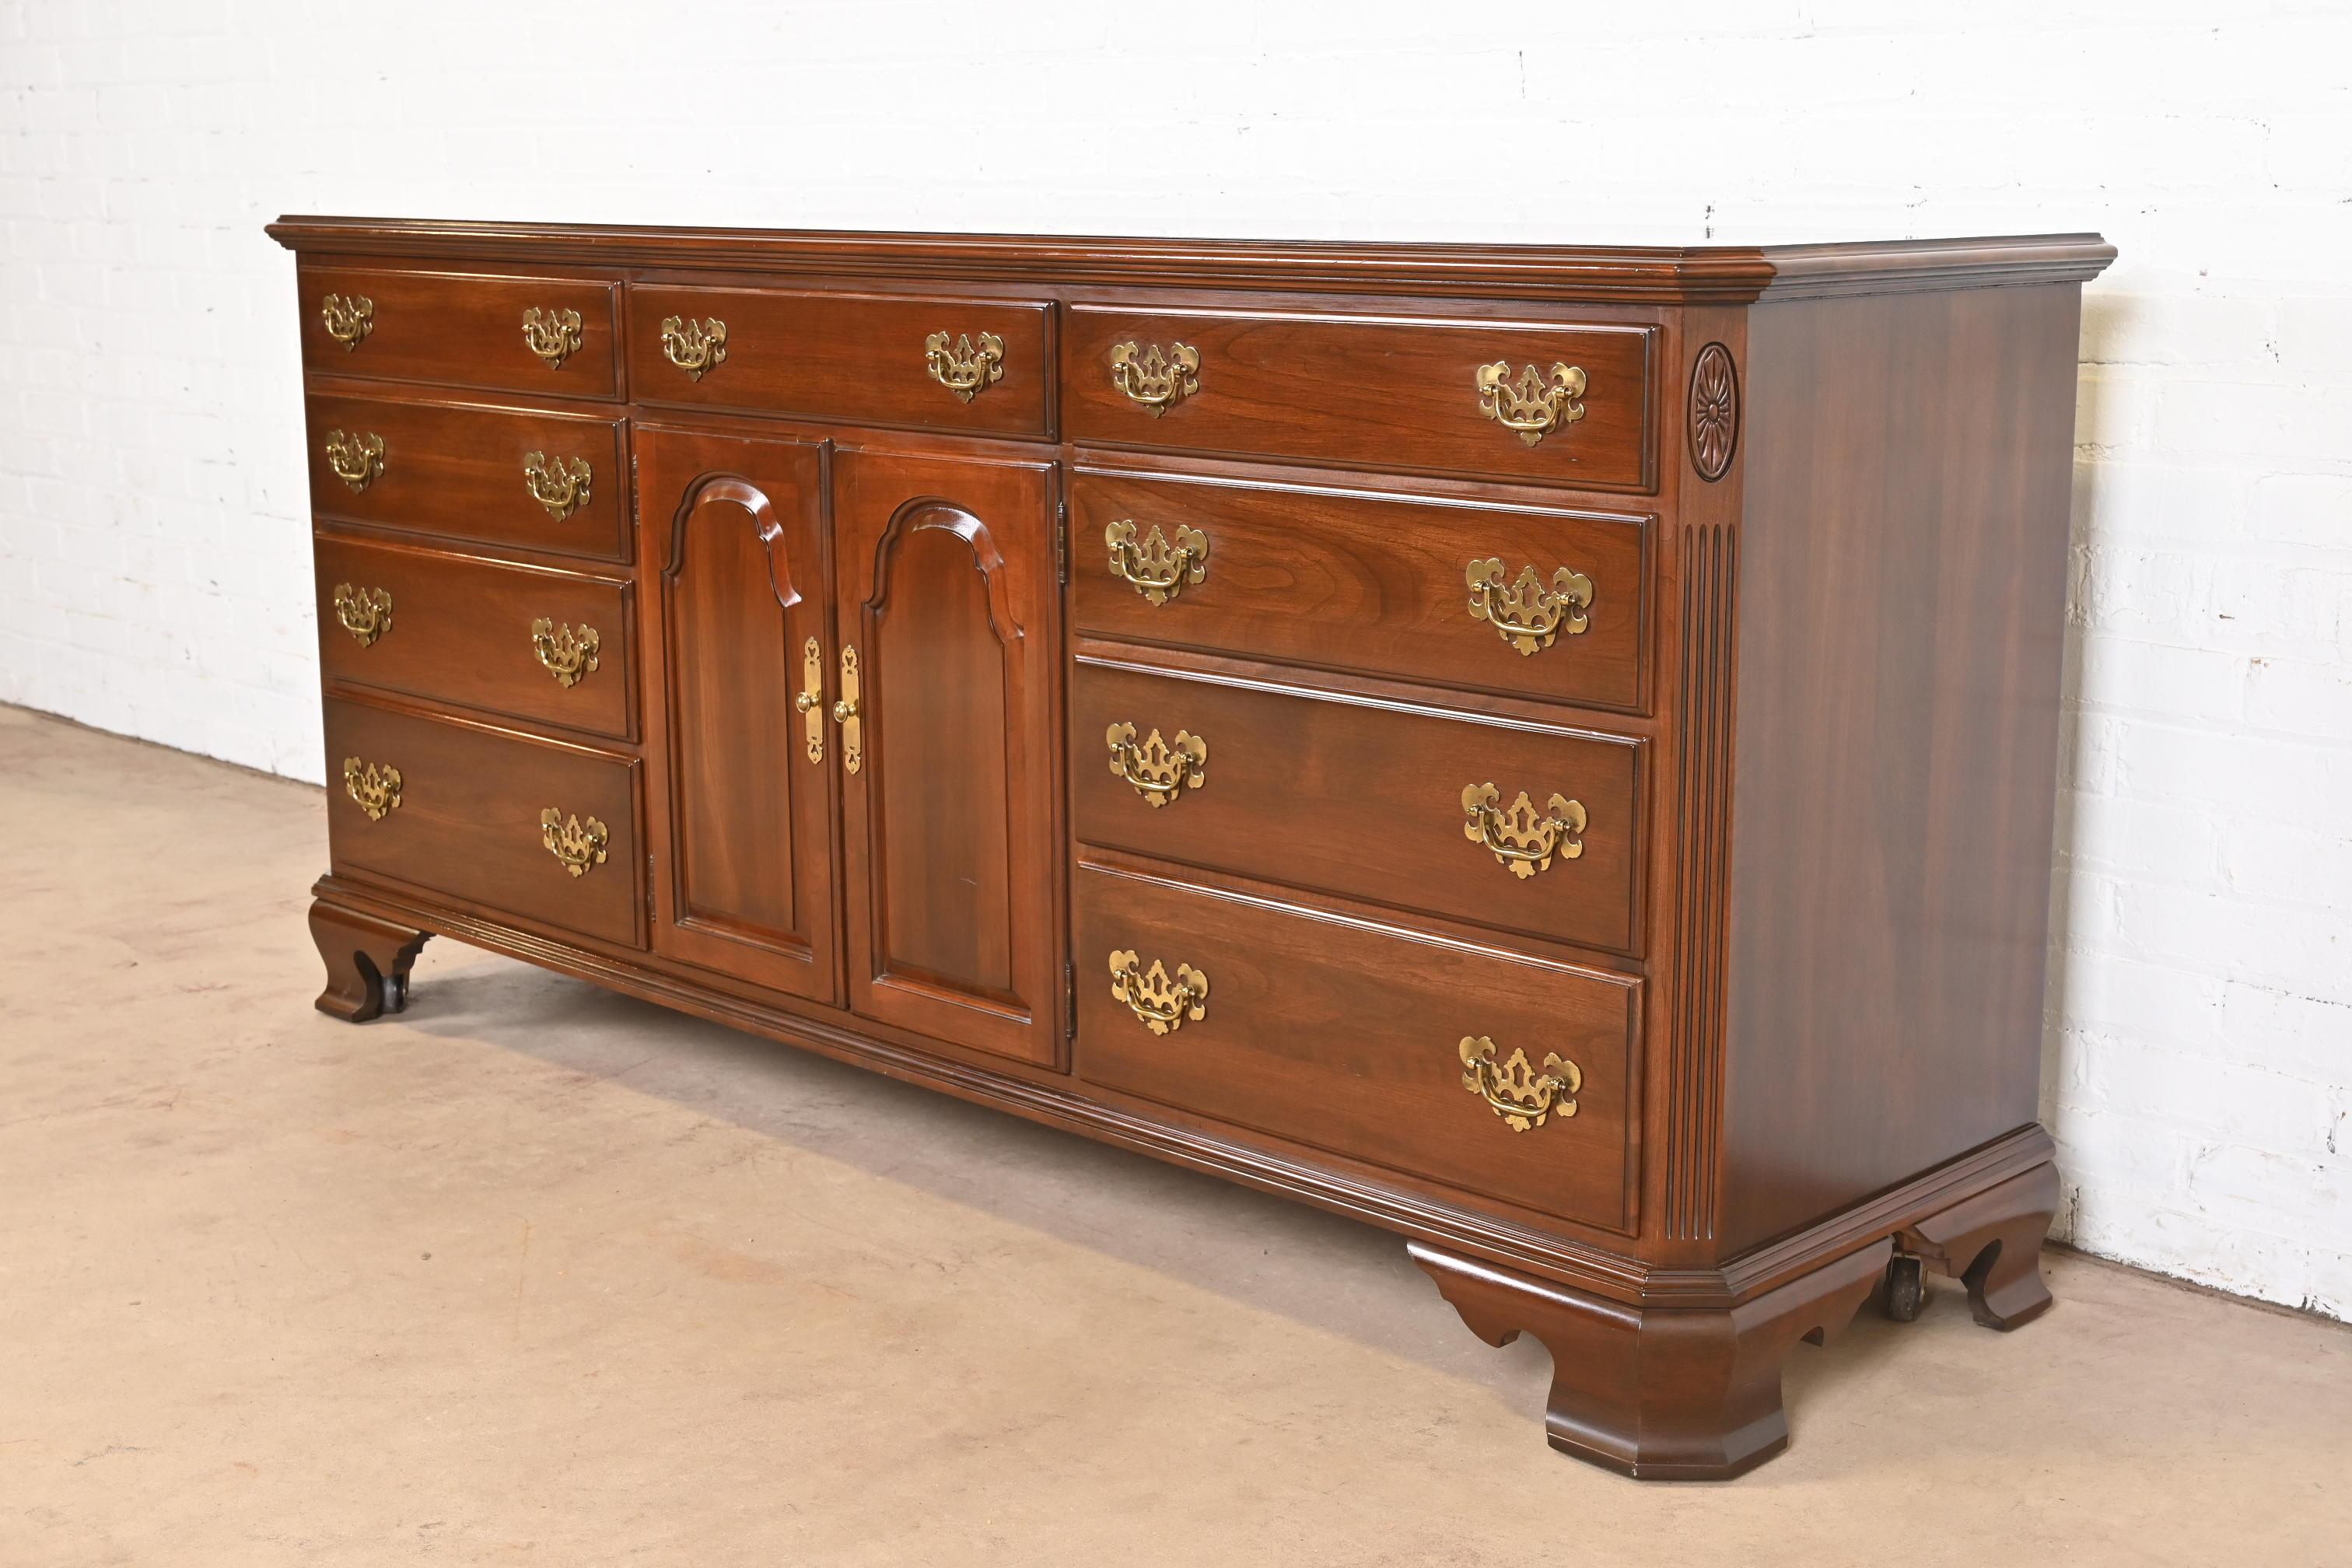 A gorgeous Georgian or Chippendale style eleven-drawer dresser or credenza

USA, 1980s

Carved solid cherry wood, with original brass hardware.

Measures: 74